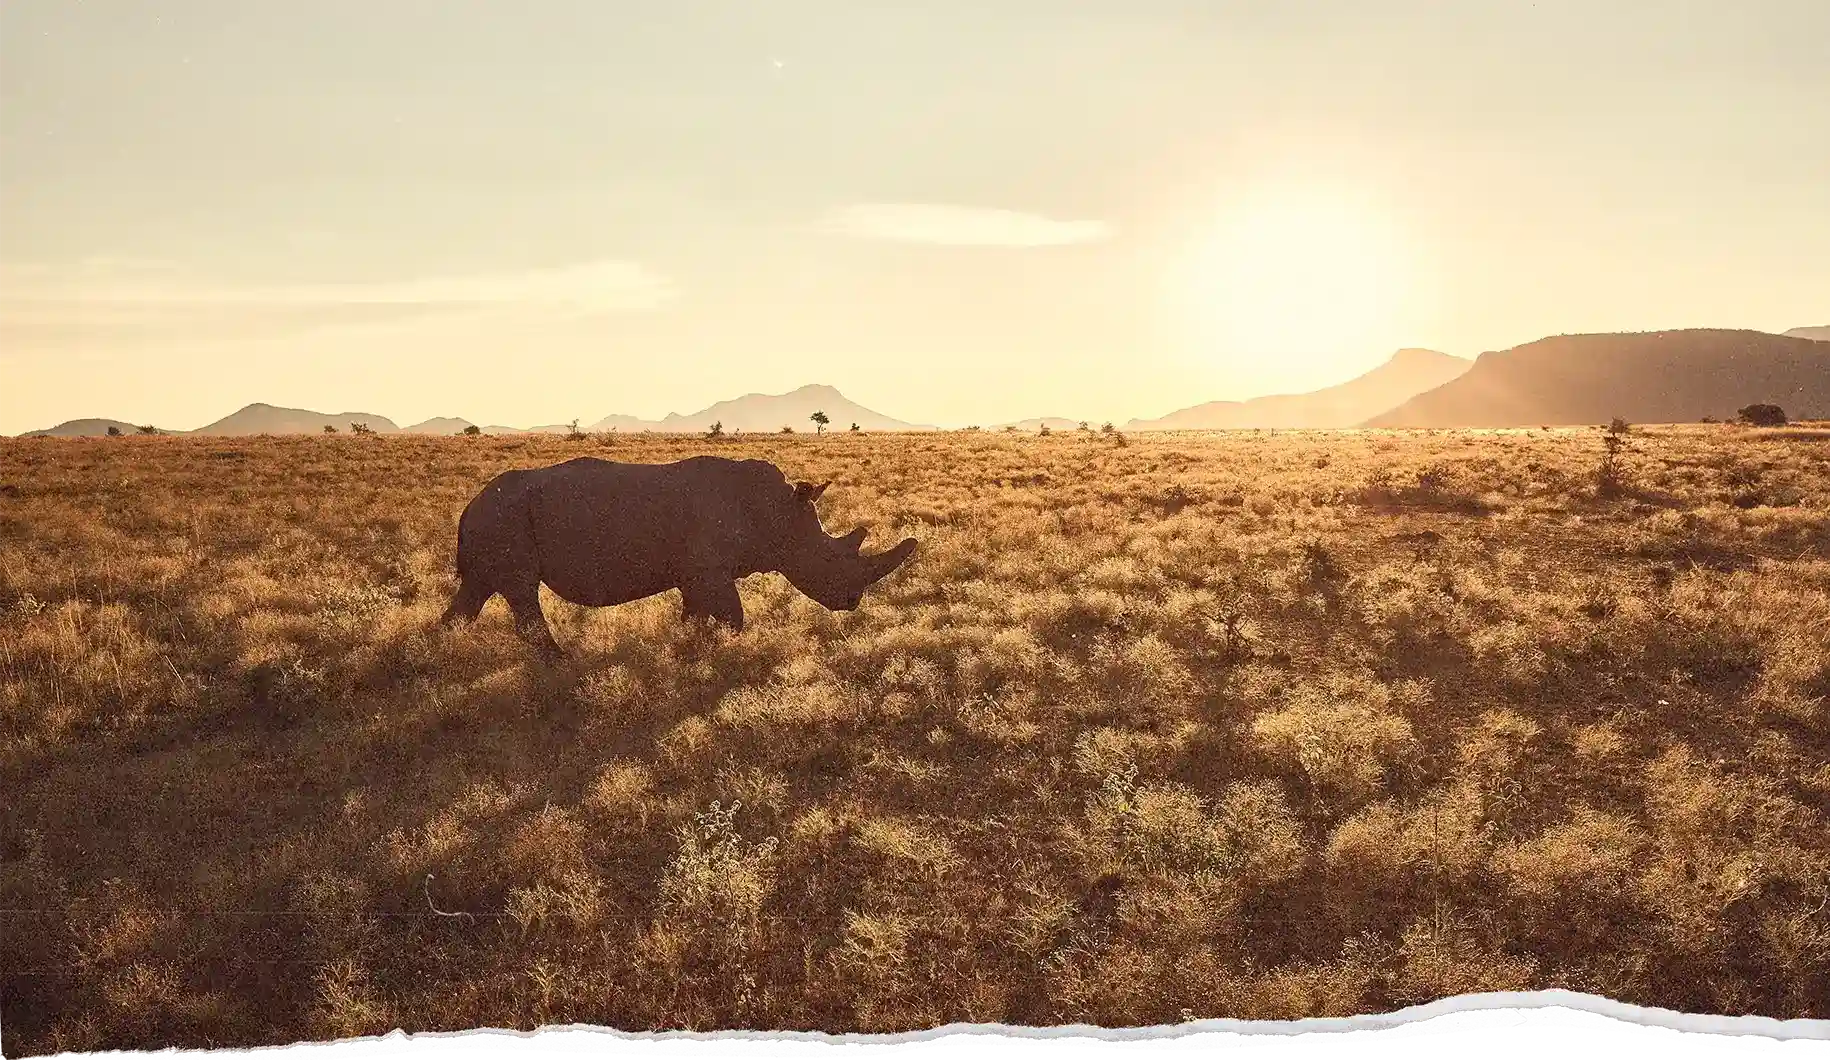 Scenic landscape image of a white rhino in the savanna during sunset behind mountain ridge